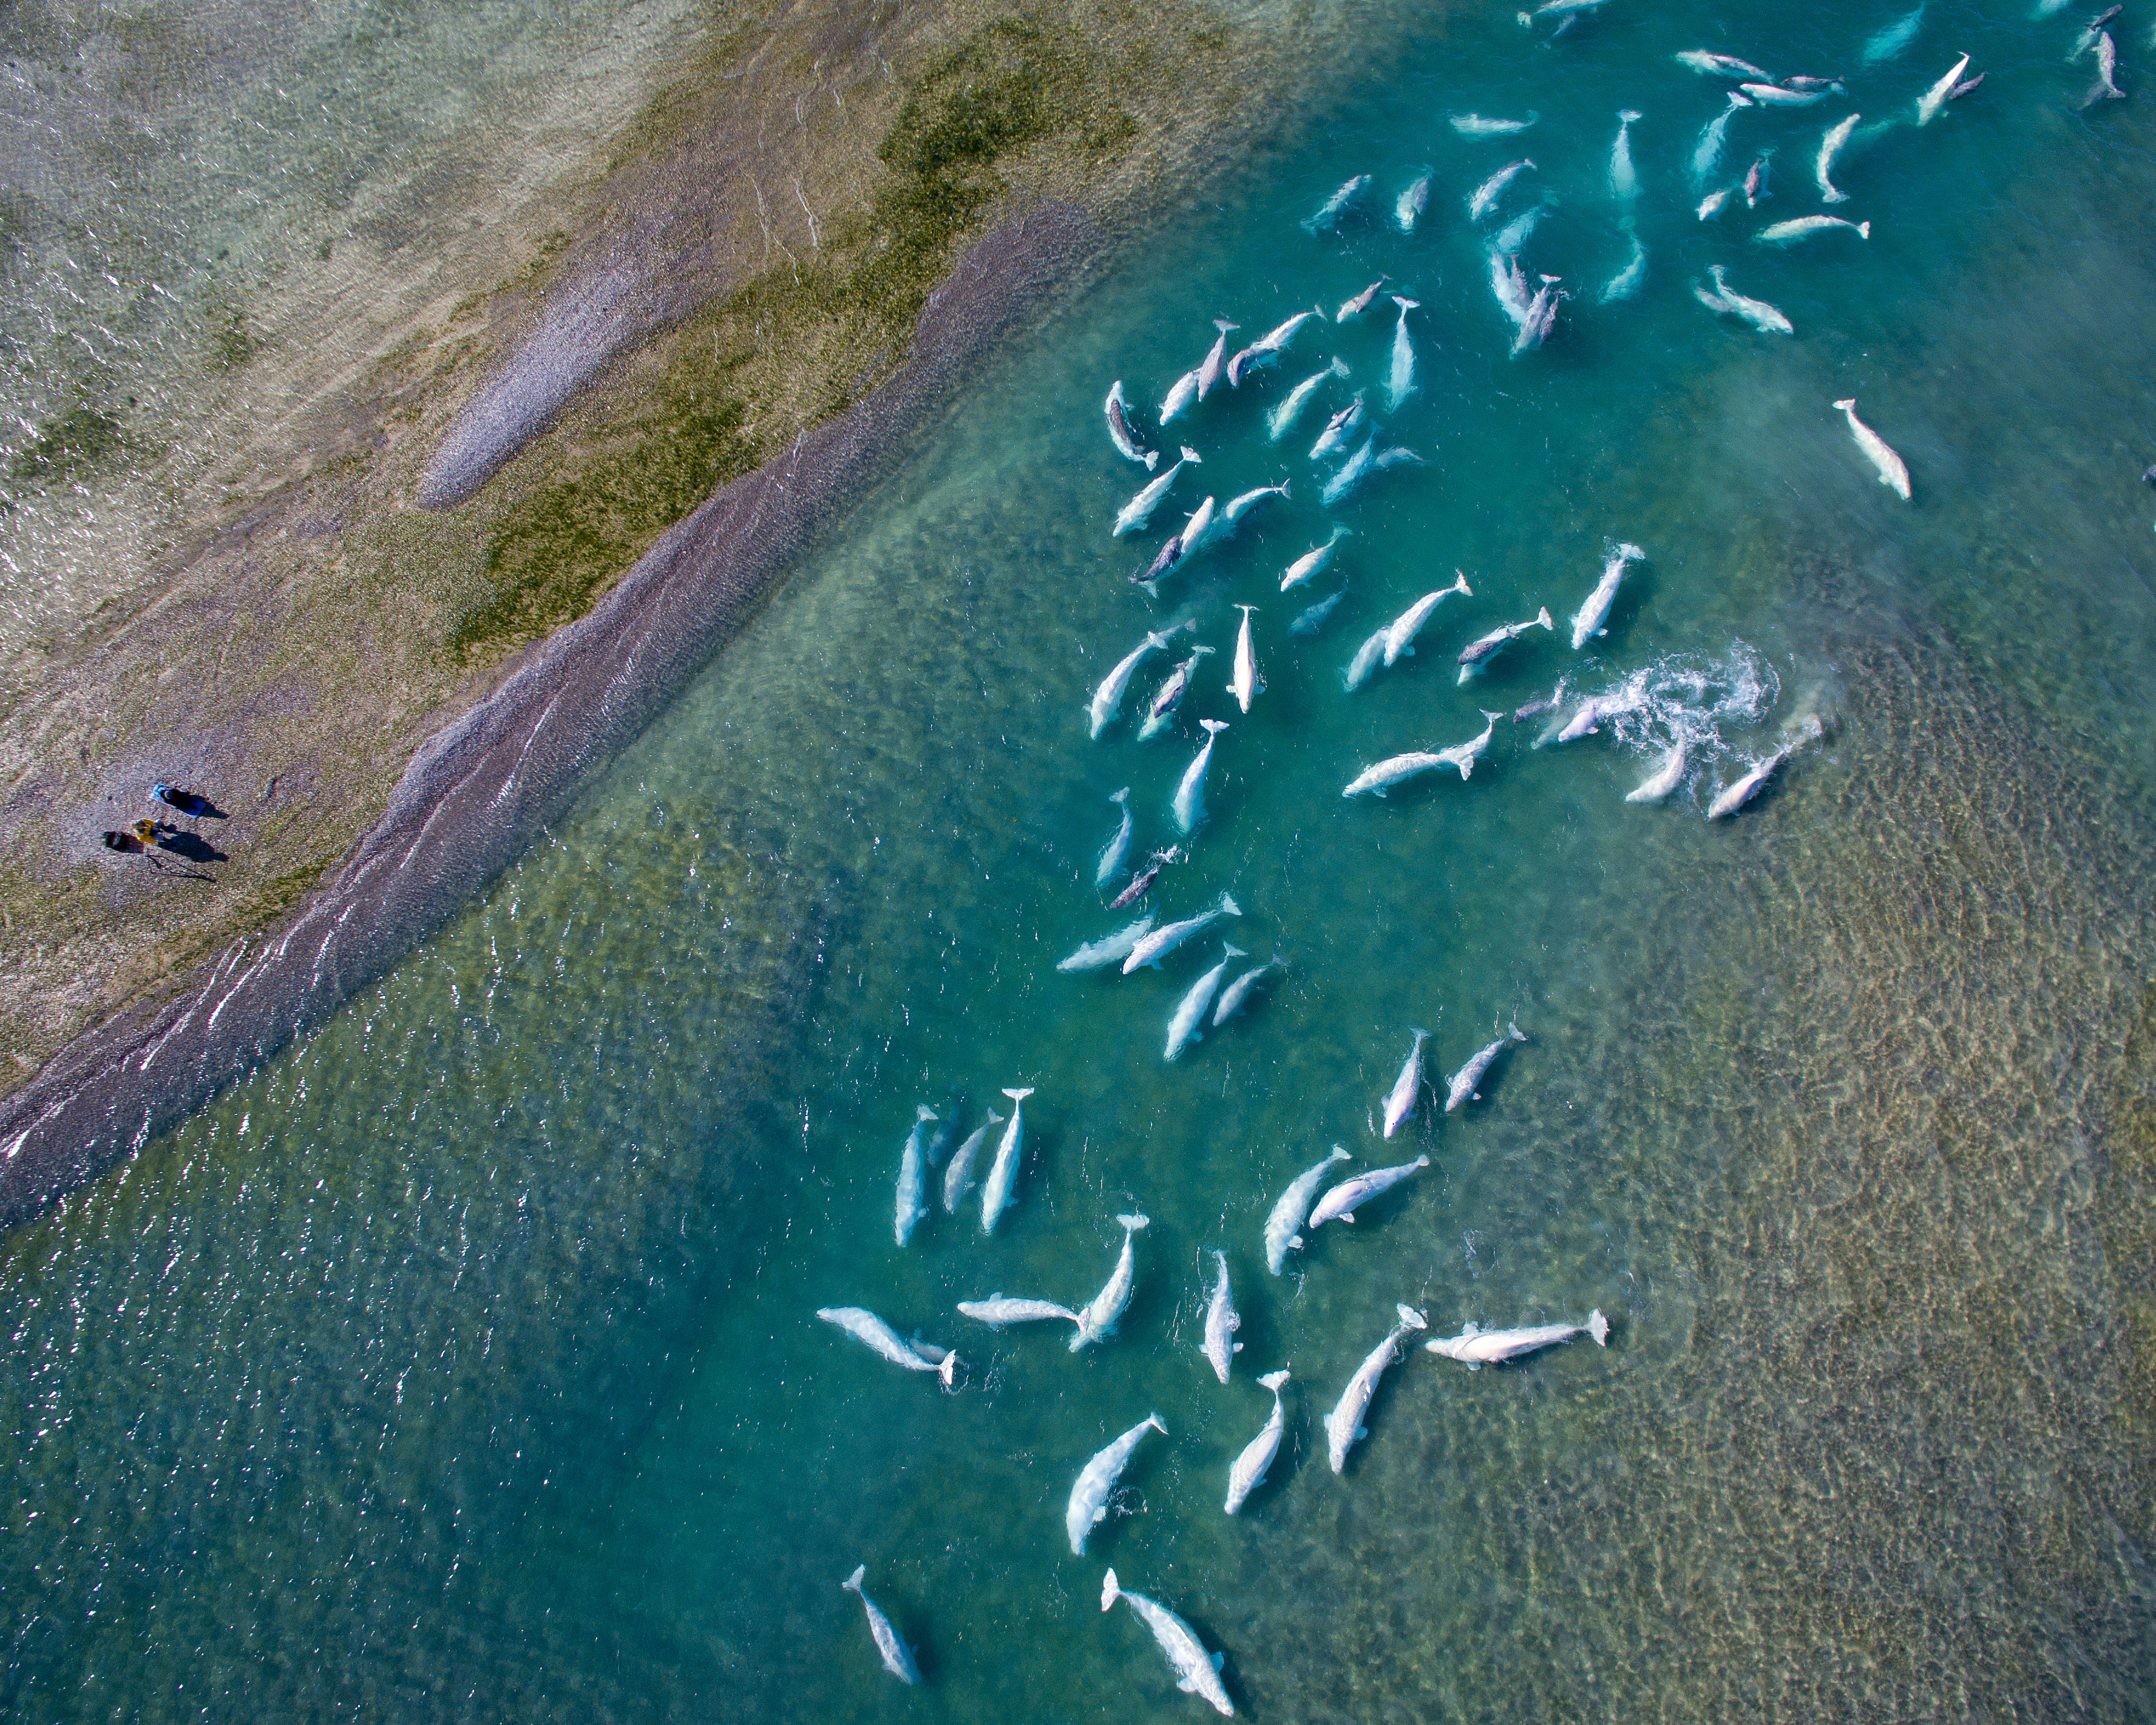 The Beluga Whale Nursery at Cunningham Inlet